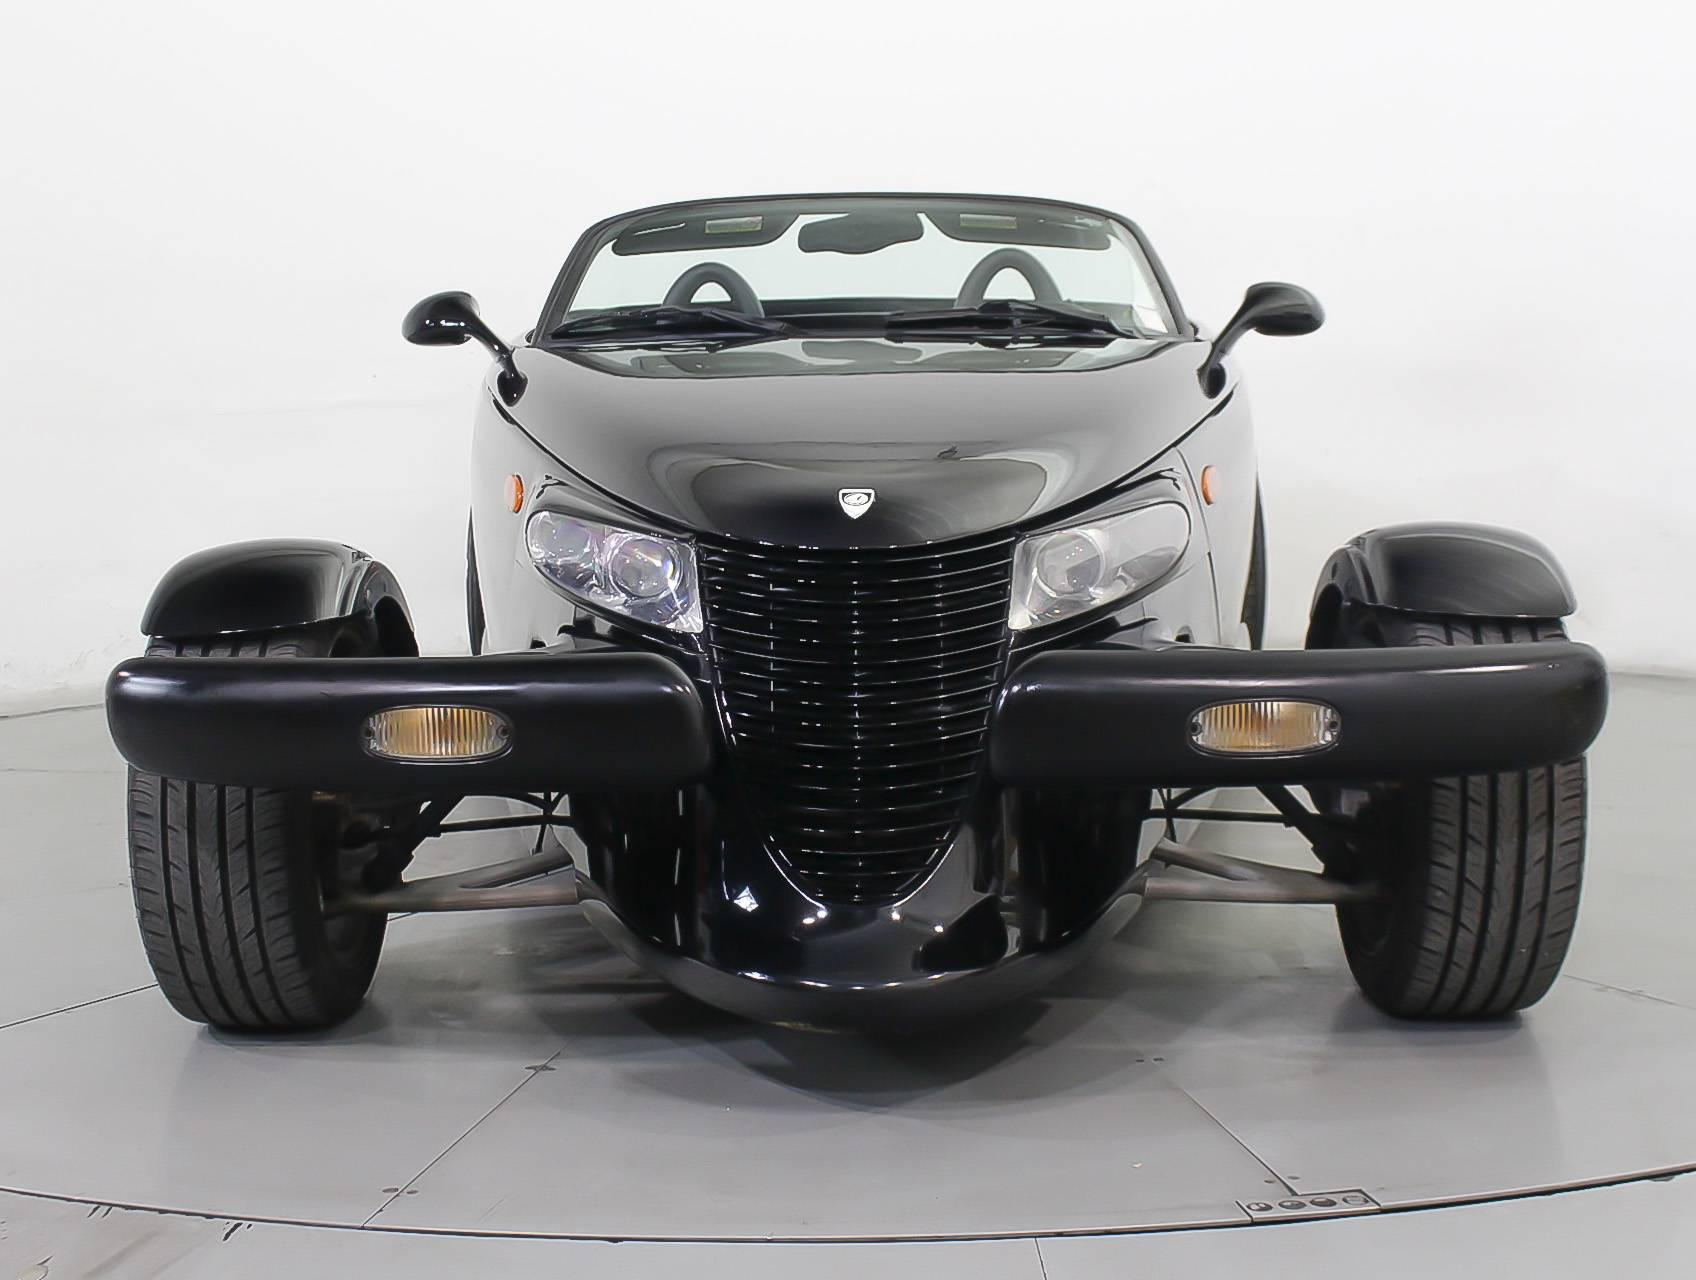 Florida Fine Cars - Used PLYMOUTH PROWLER 2000 MIAMI 